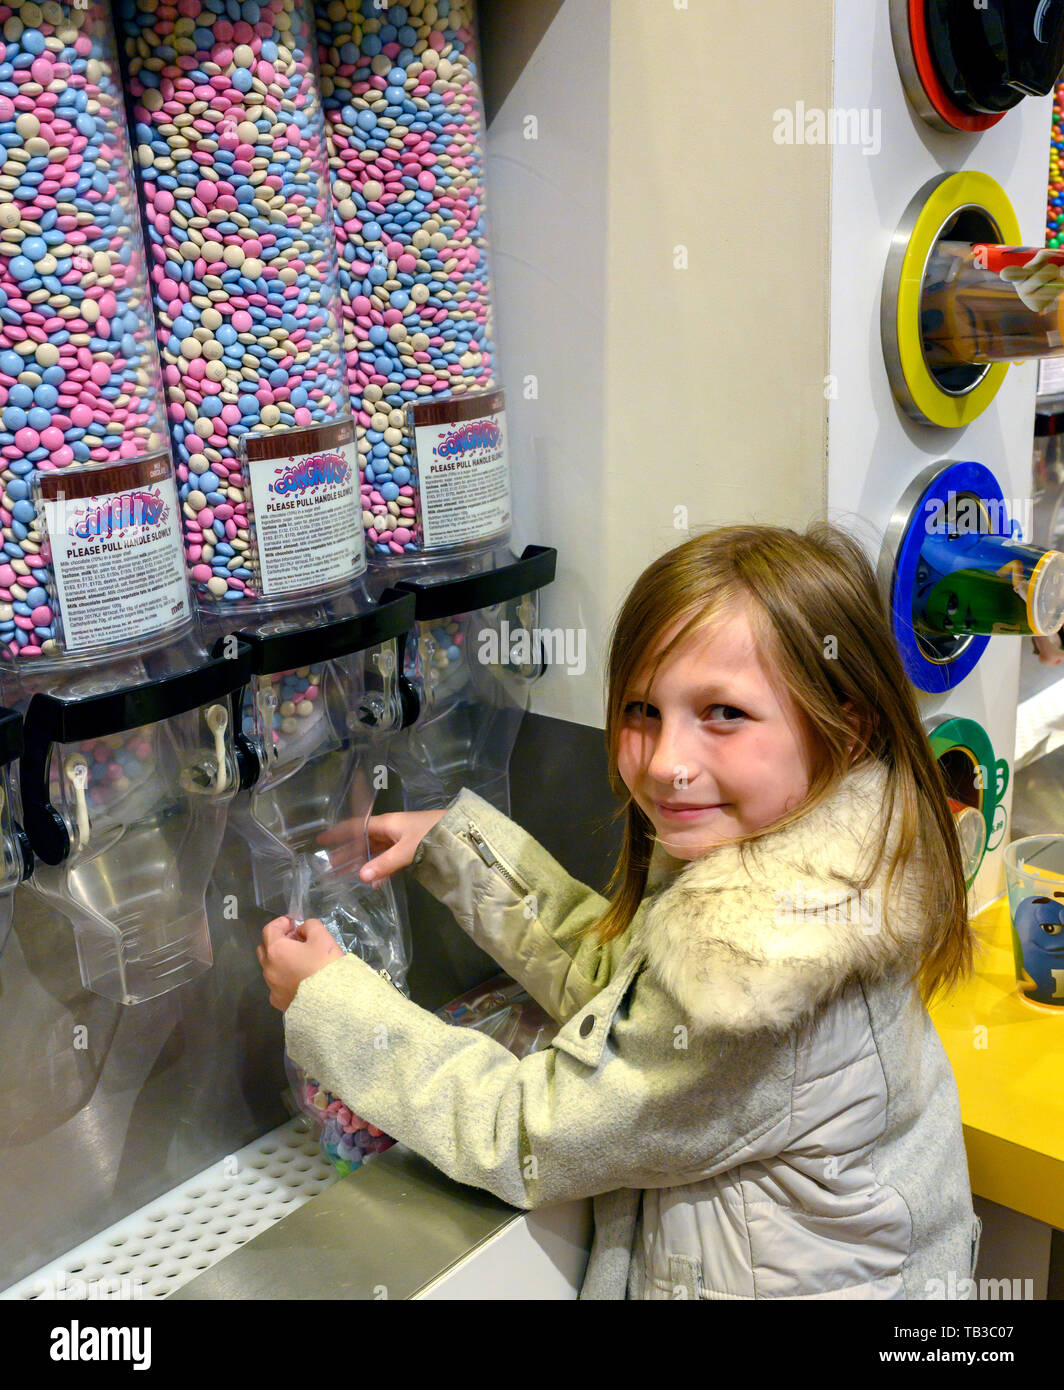 8 year old girl selects some sweets from a dispenser. Stock Photo